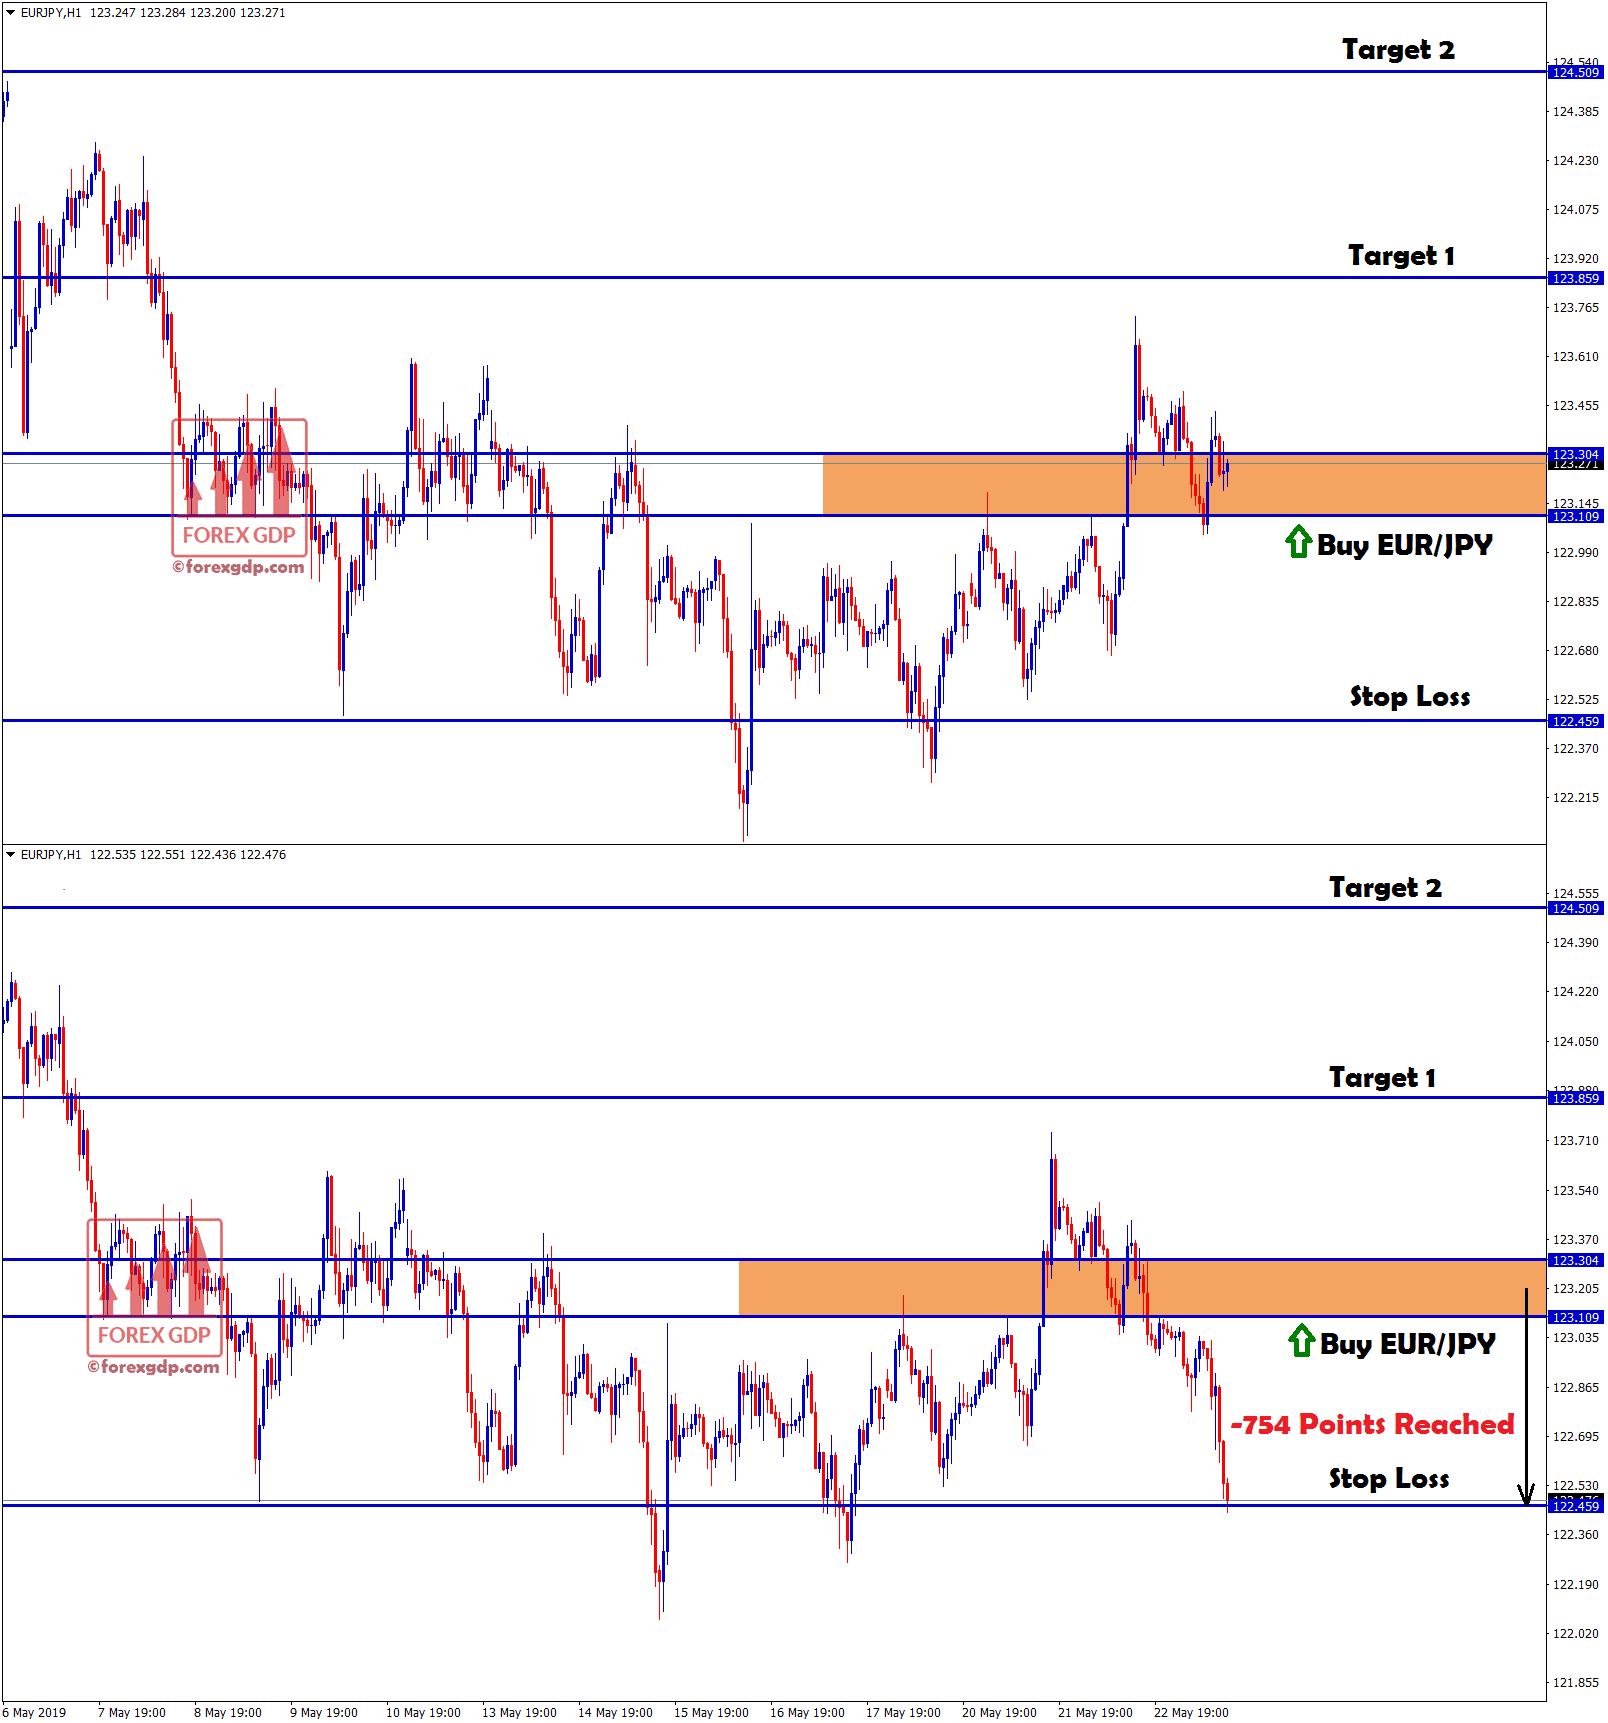 eurjpy reached stoploss with -754 points